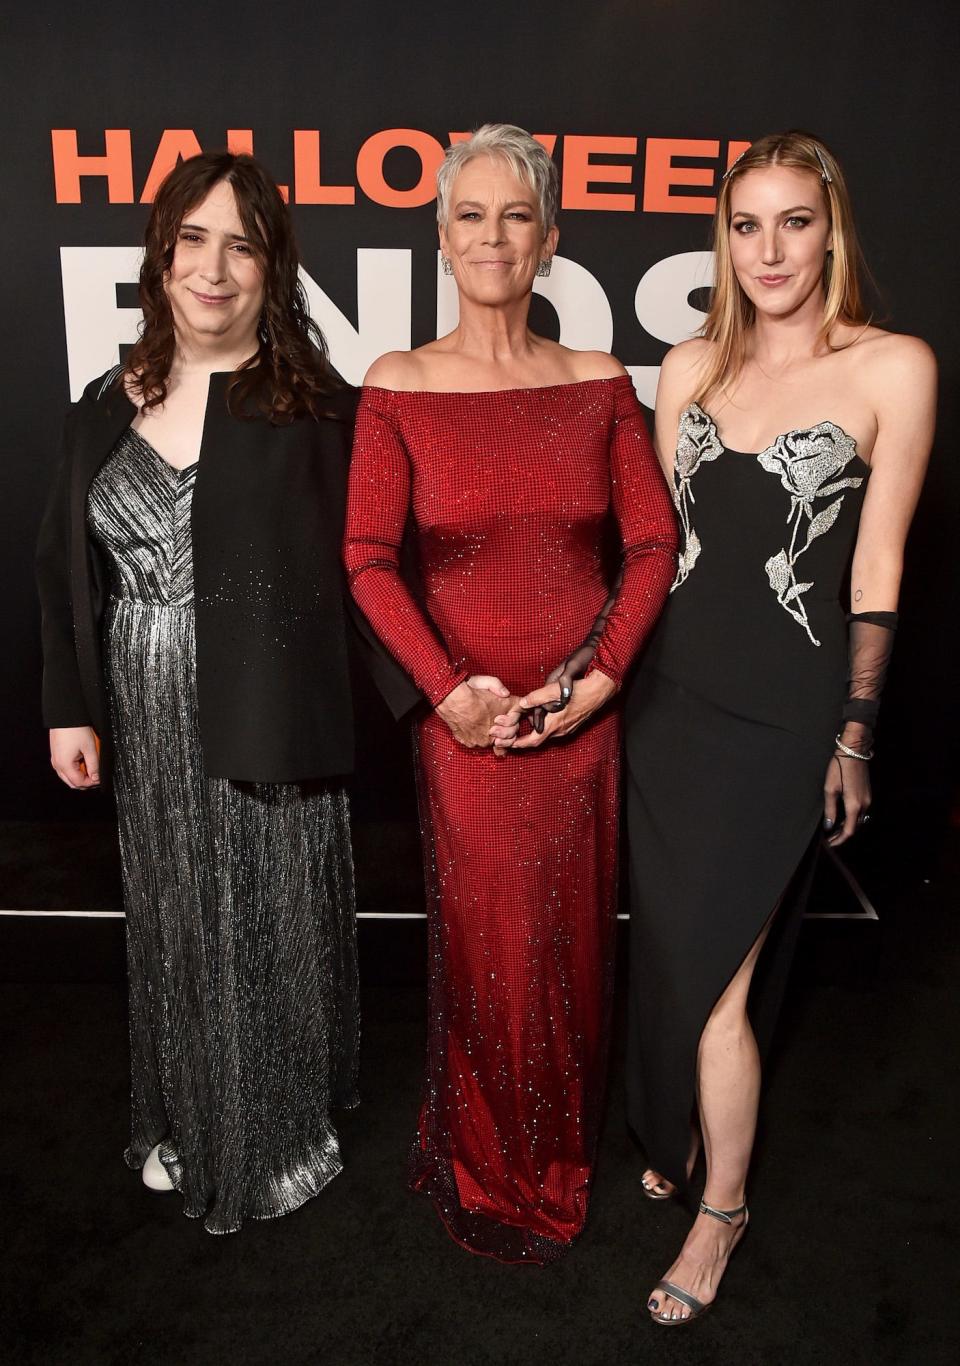 Ruby Guest, Jamie Lee Curtis, and Annie Guest at the "Halloween Ends" premiere on October 11, 2022.